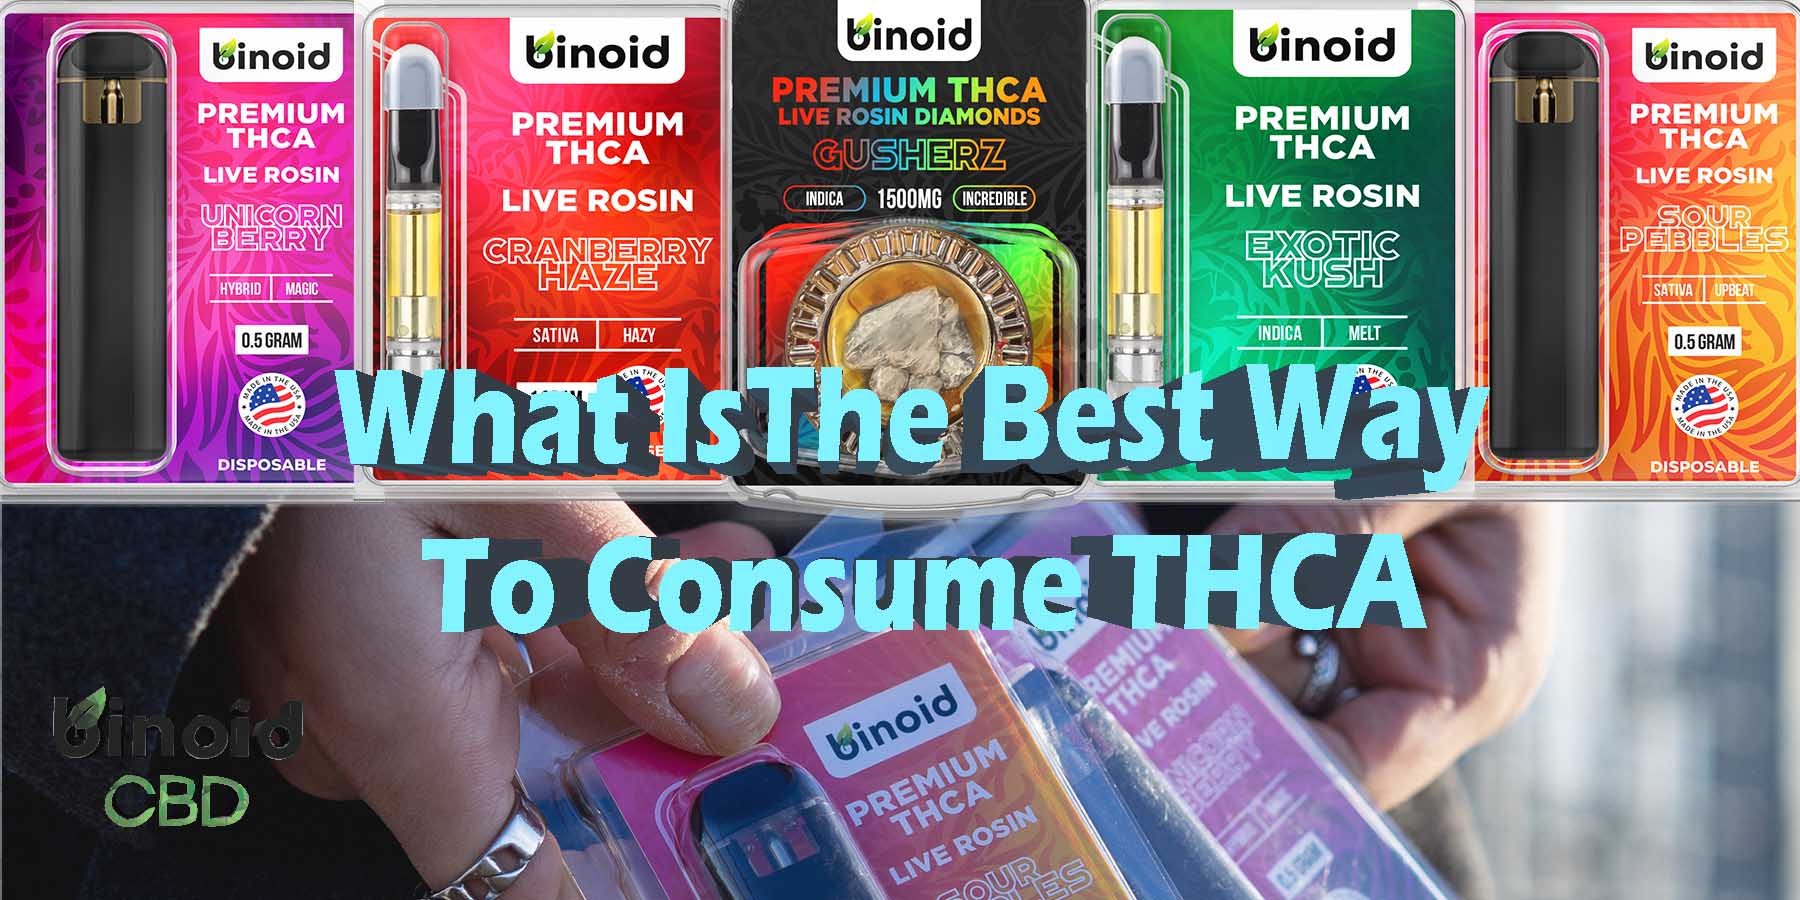 What Is The Best Way To Consume THCA Best Brand Vapes Disposables Strongest Get Near Me Where To Buy Binoid